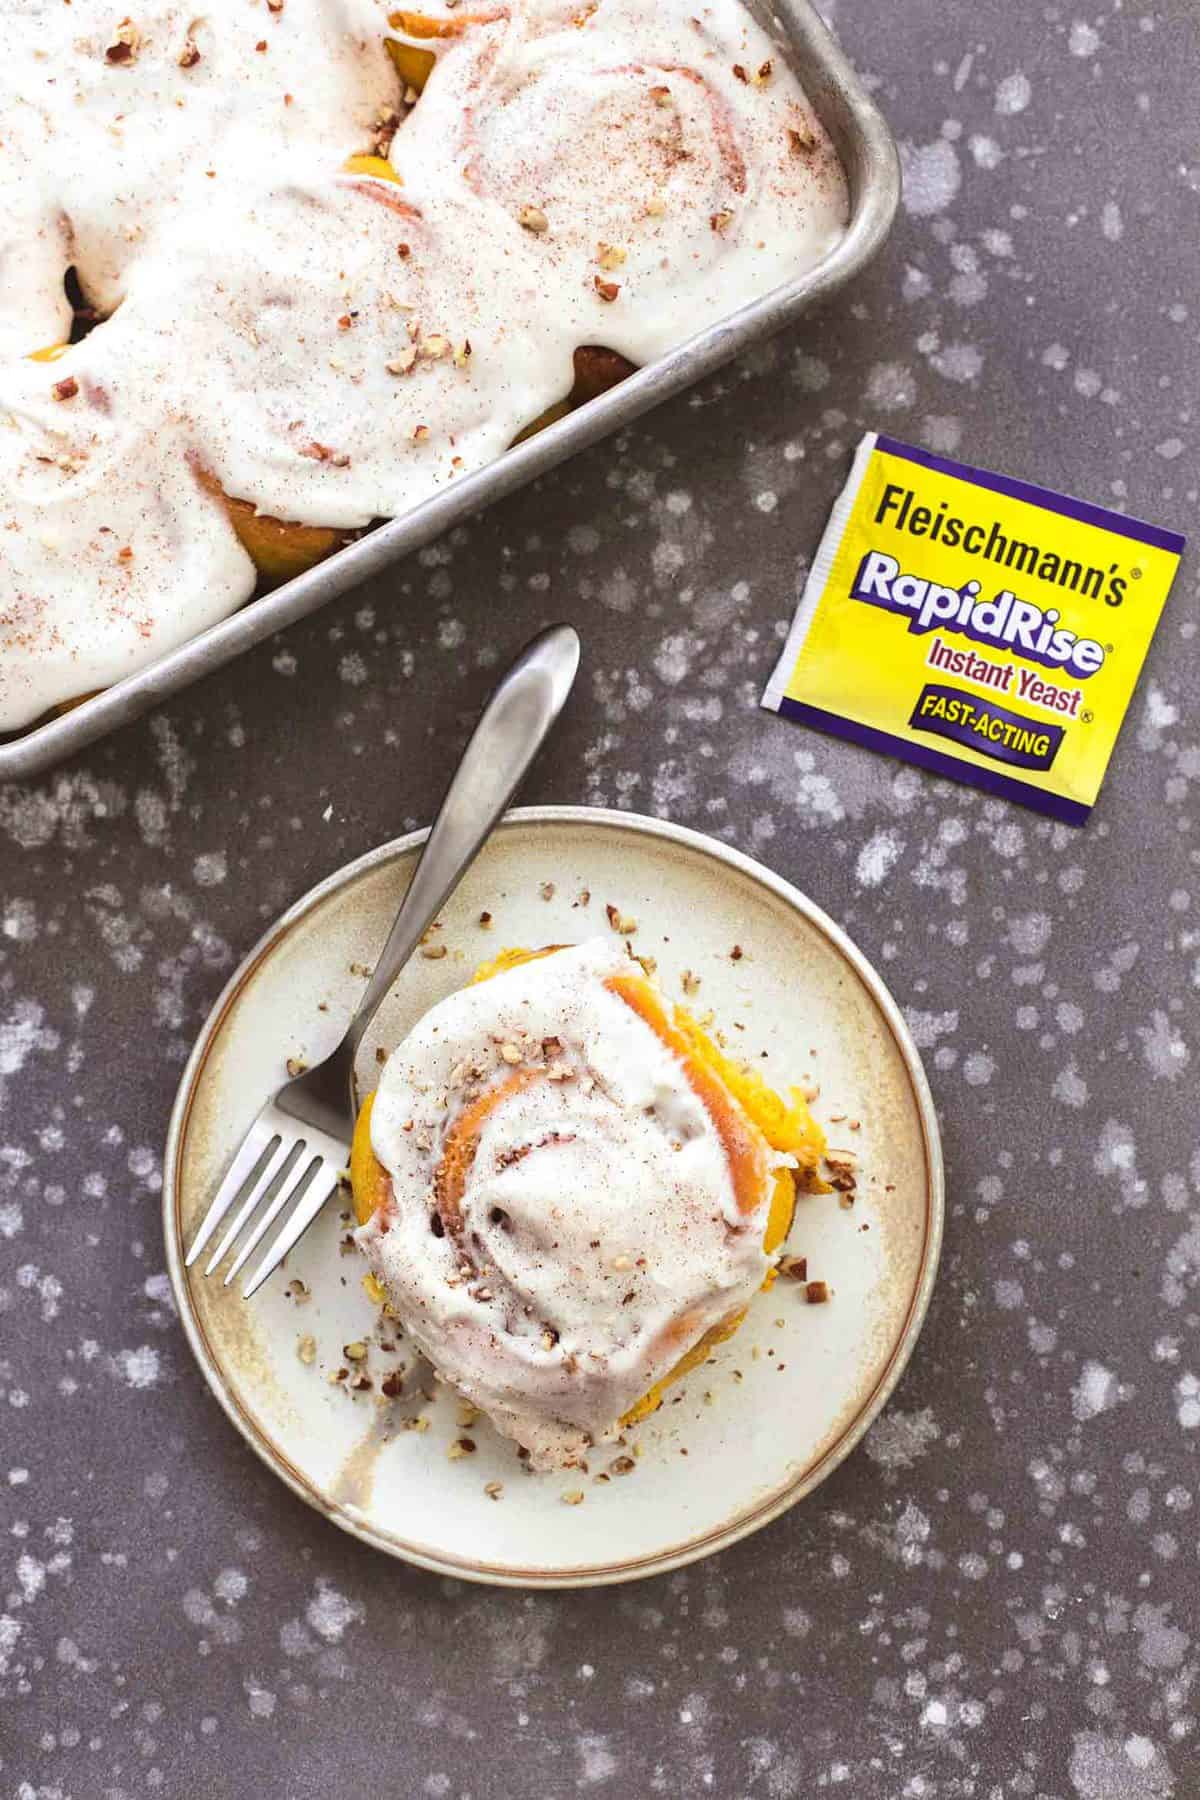 top view of a pumpkin cinnamon roll with a fork on a plate with a packet of RapidRise yeast and a baking sheet of more cinnamon rolls on the side.